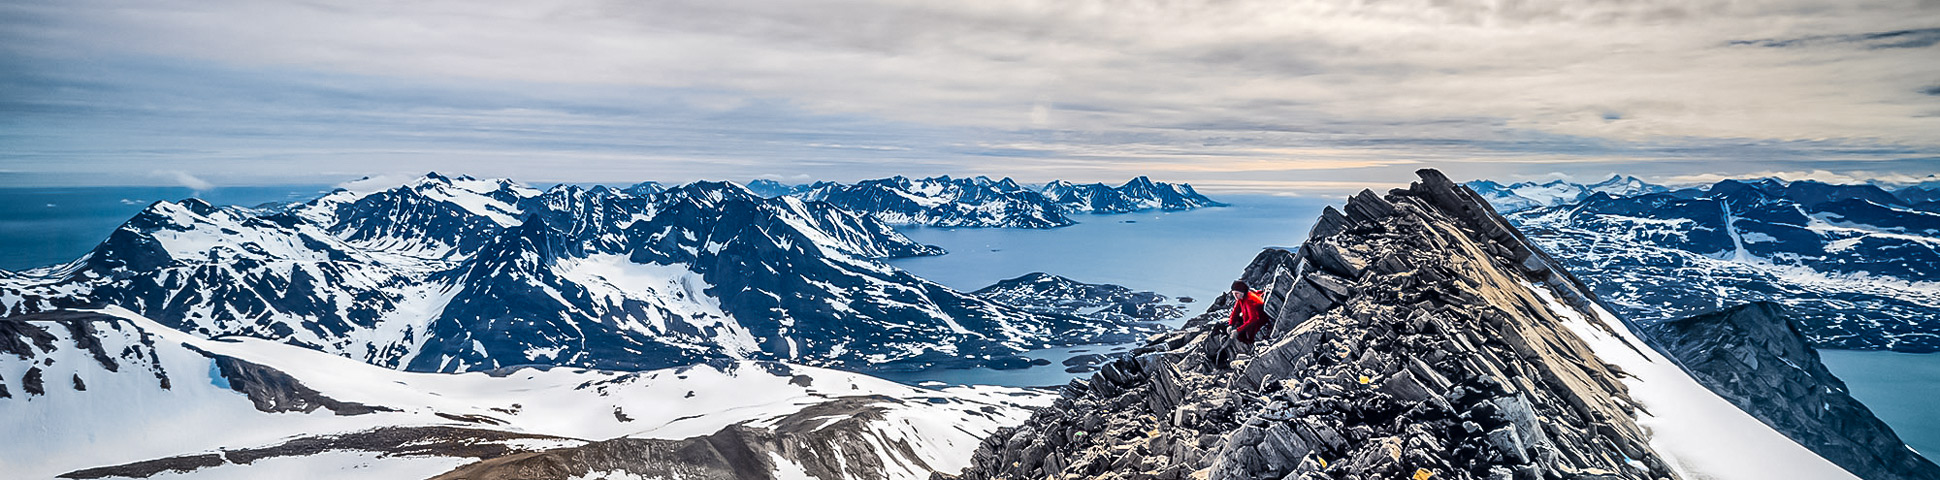 Trekking the Icefjords of East Greenland Tour